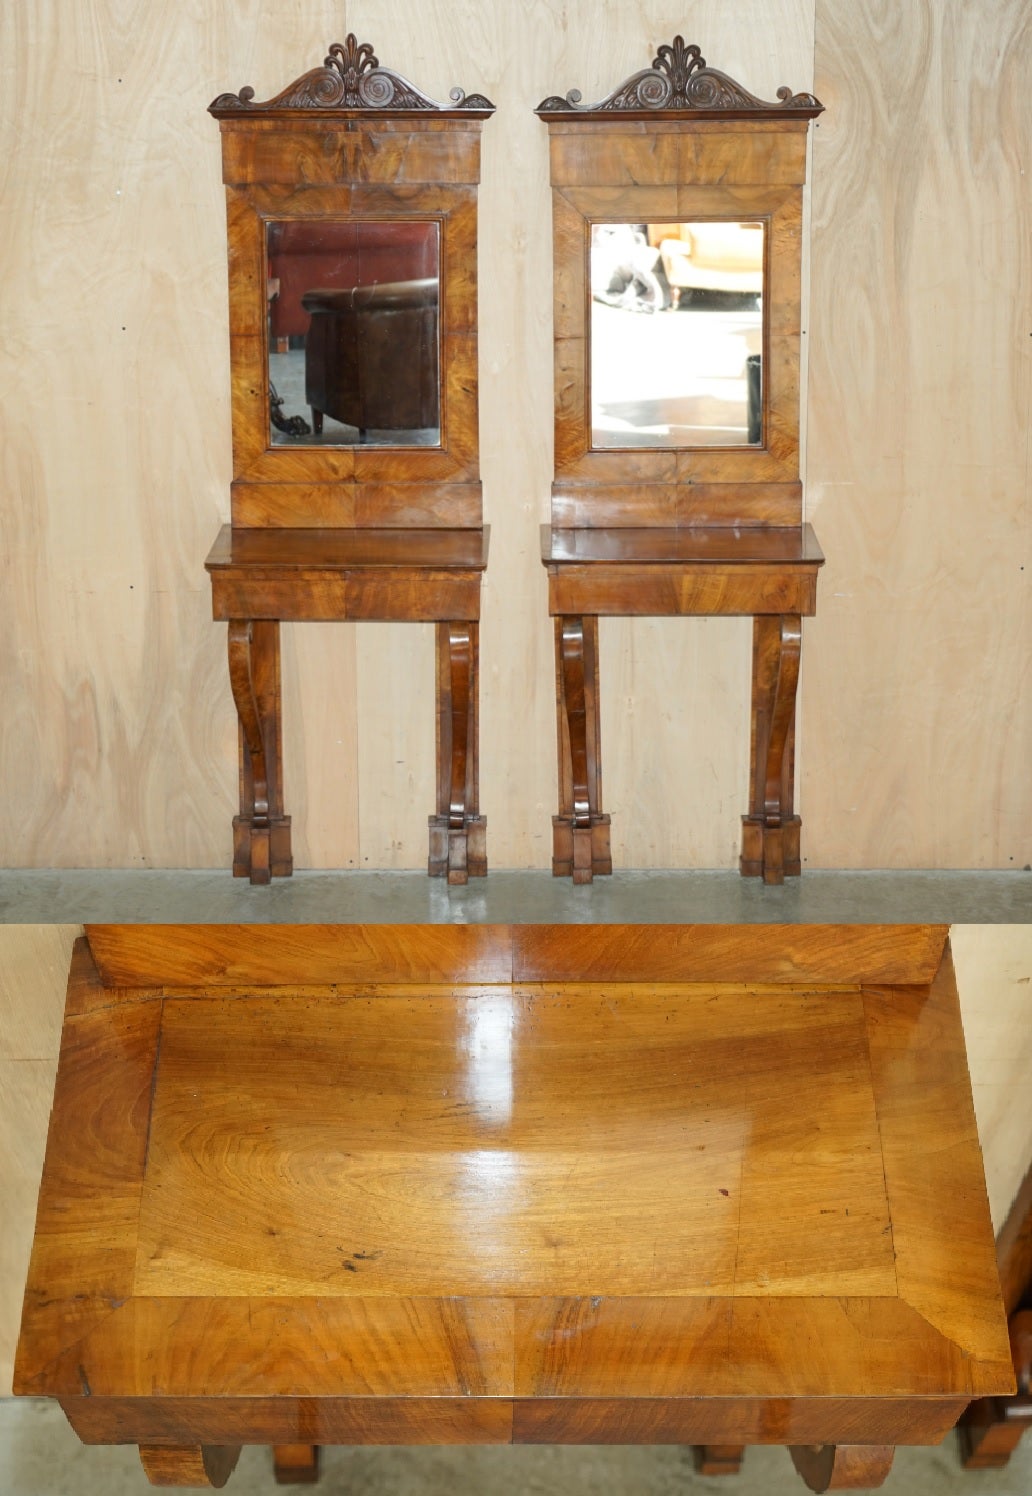 Royal House Antiques

Royal House Antiques is delighted to offer for sale this exquisite suite of fully restored Regency circa 1810-1820 Console tables with matching pier mirrors 

Please note the delivery fee listed is just a guide, it covers